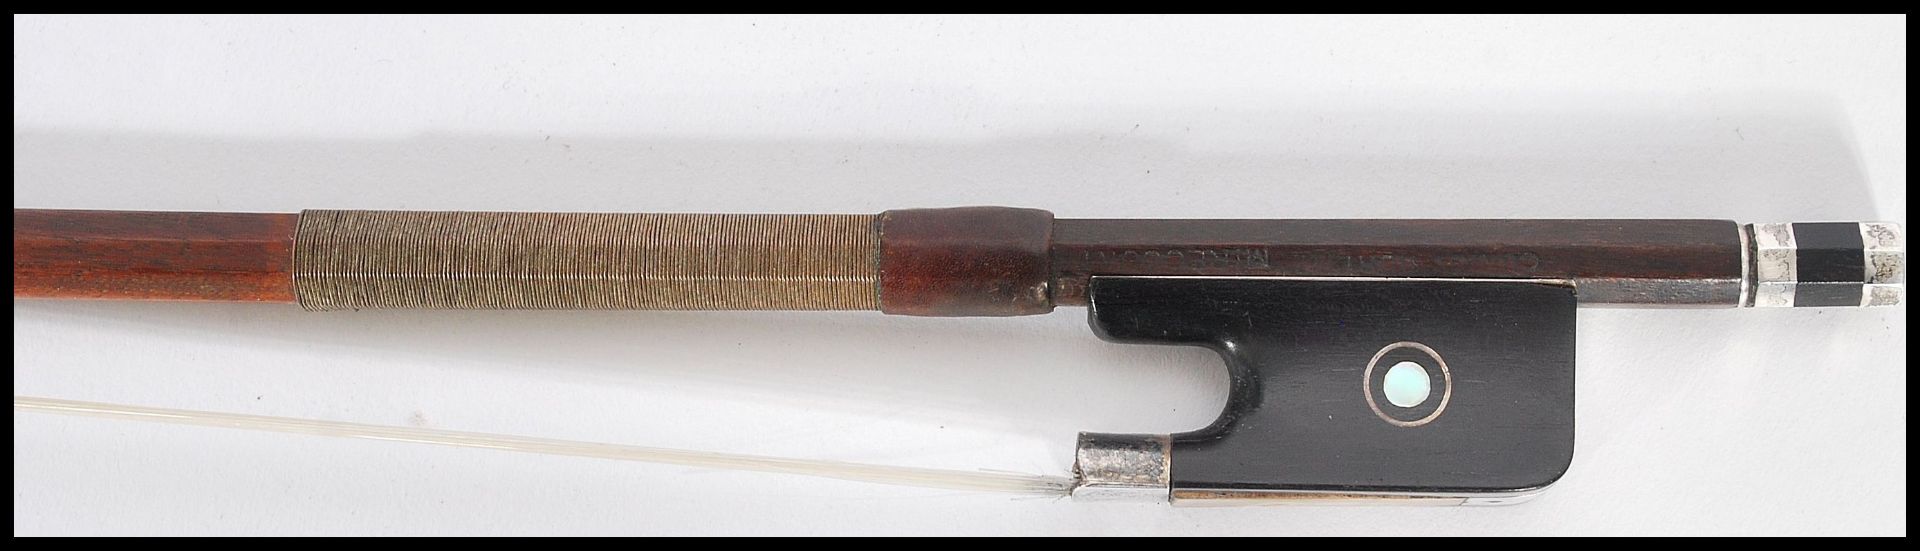 EUGENE CUNIOT " CUNIOT-HURY " (1861 - 1920) FRENCH VIOLIN BOW